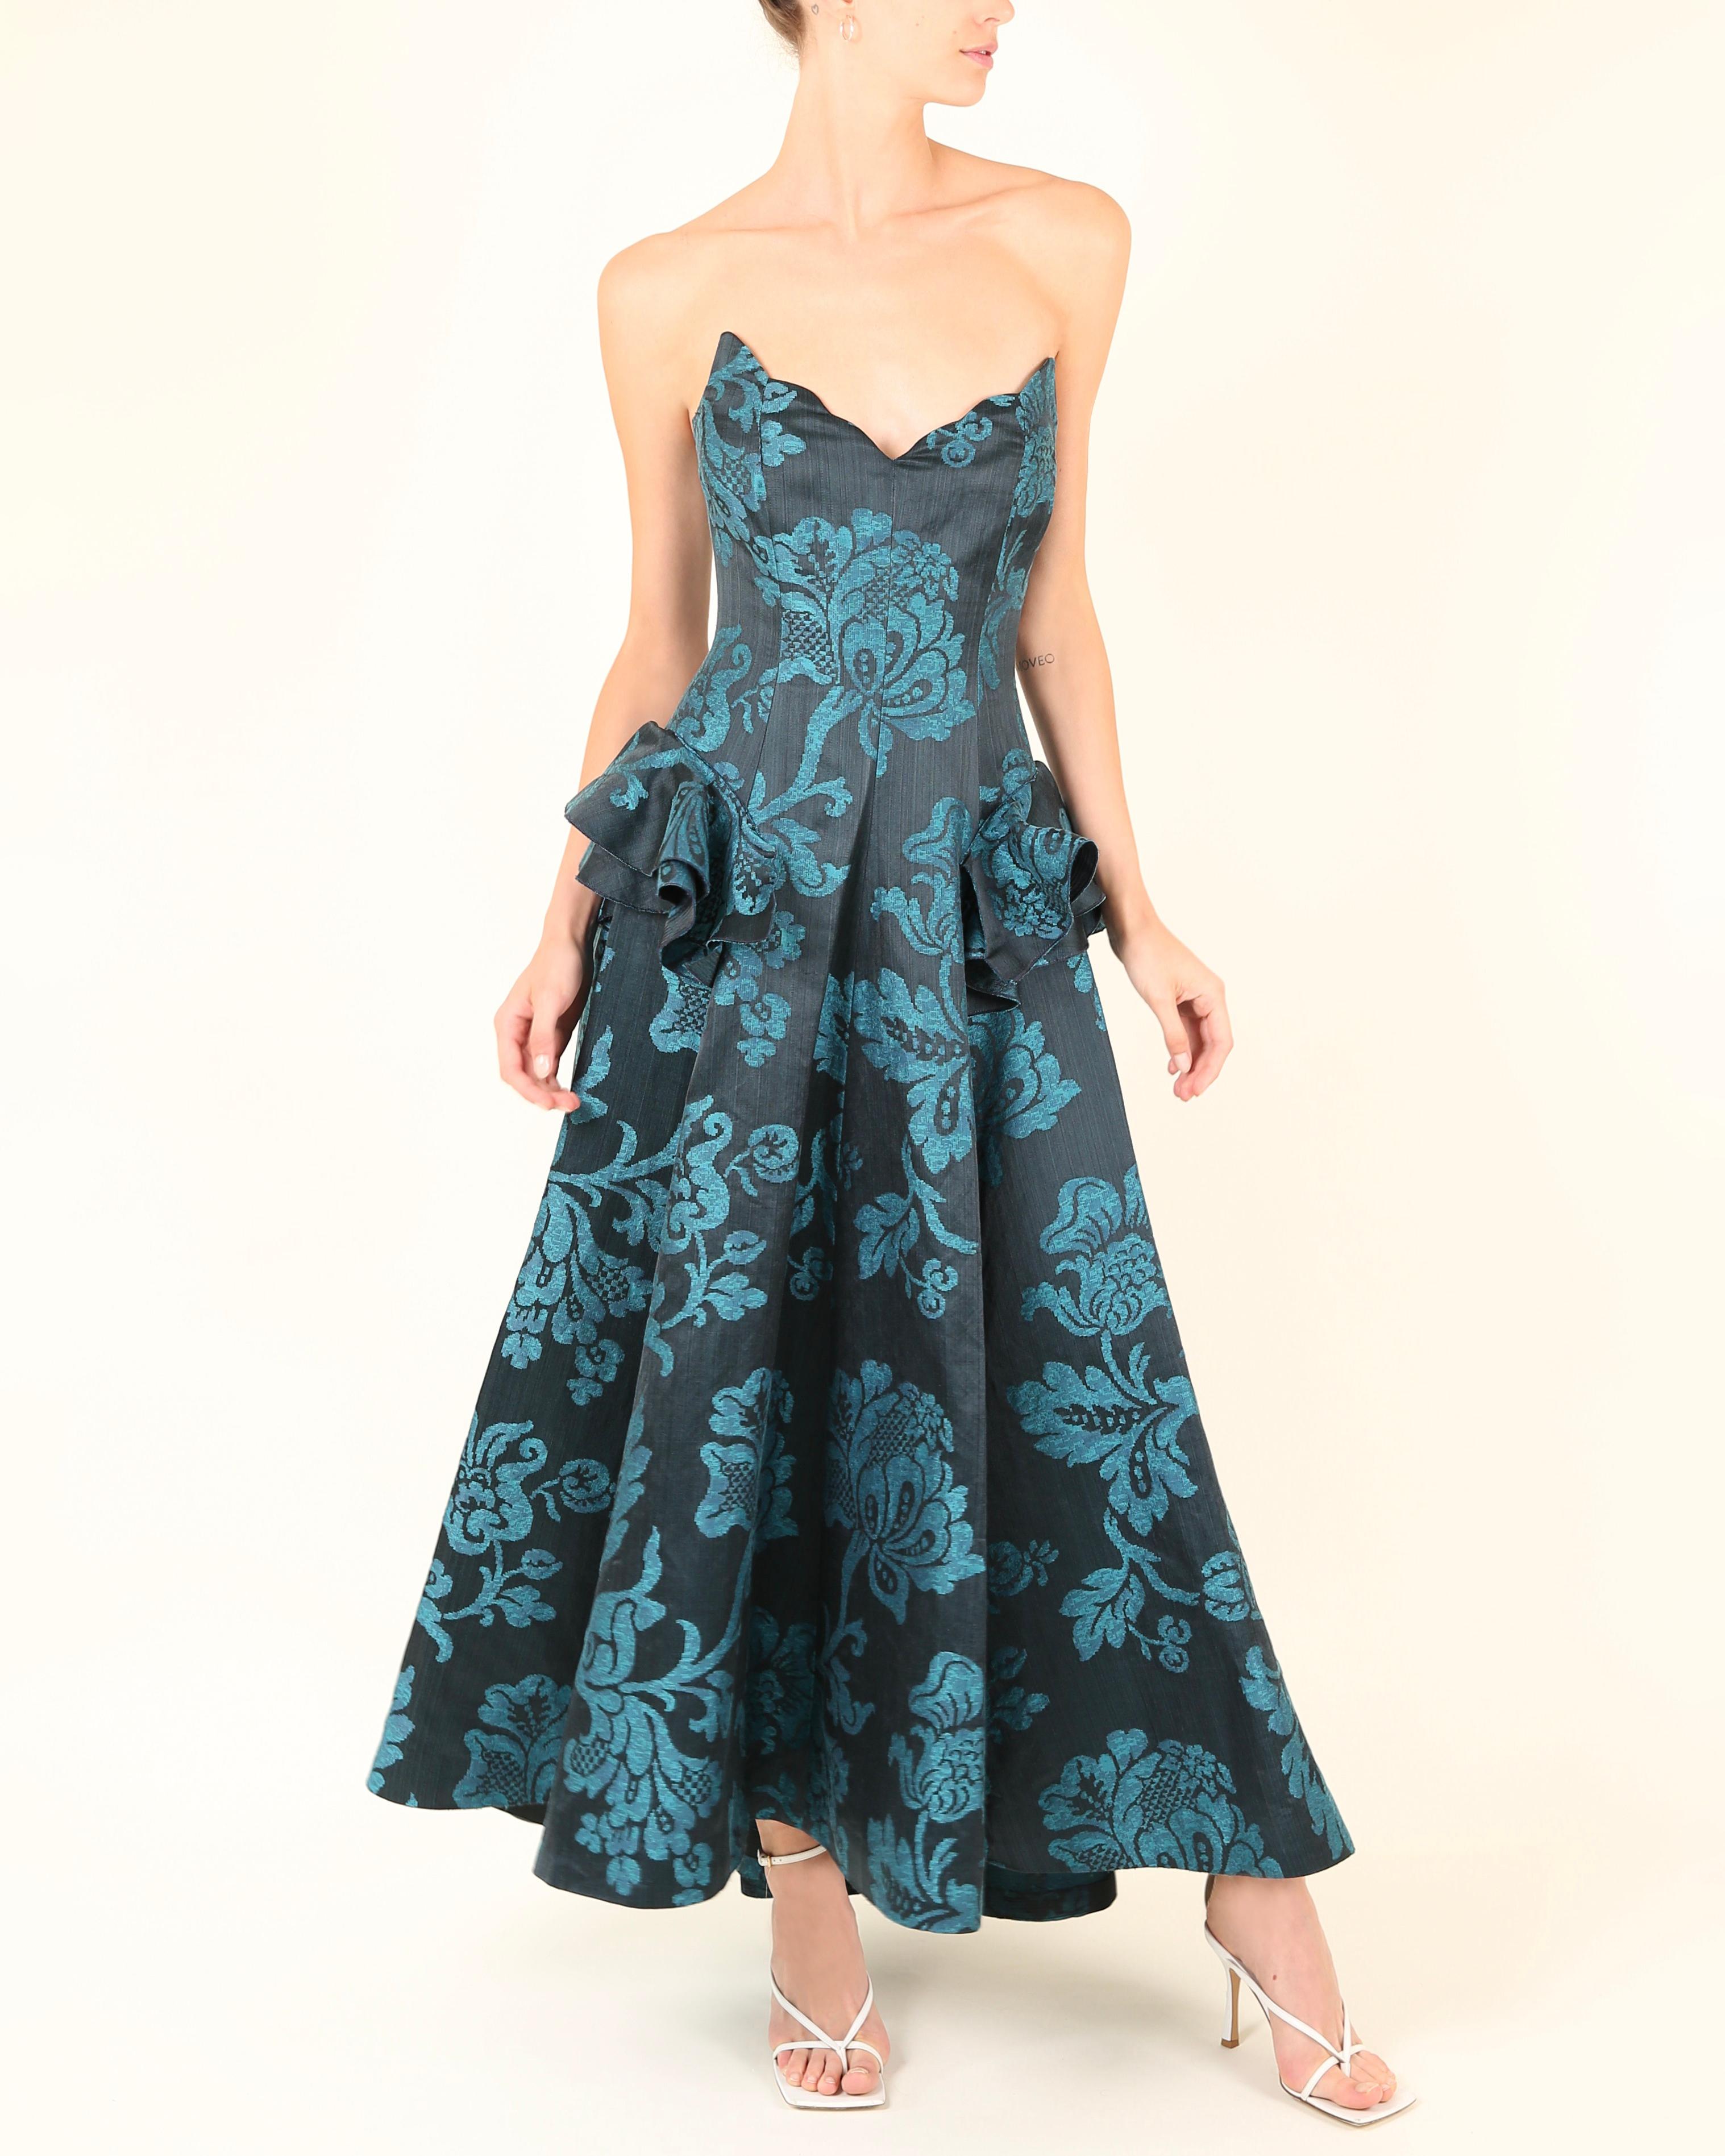 Oscar de la Renta F/W06 strapless floral blue teal fit and flare dress gown XS For Sale 4